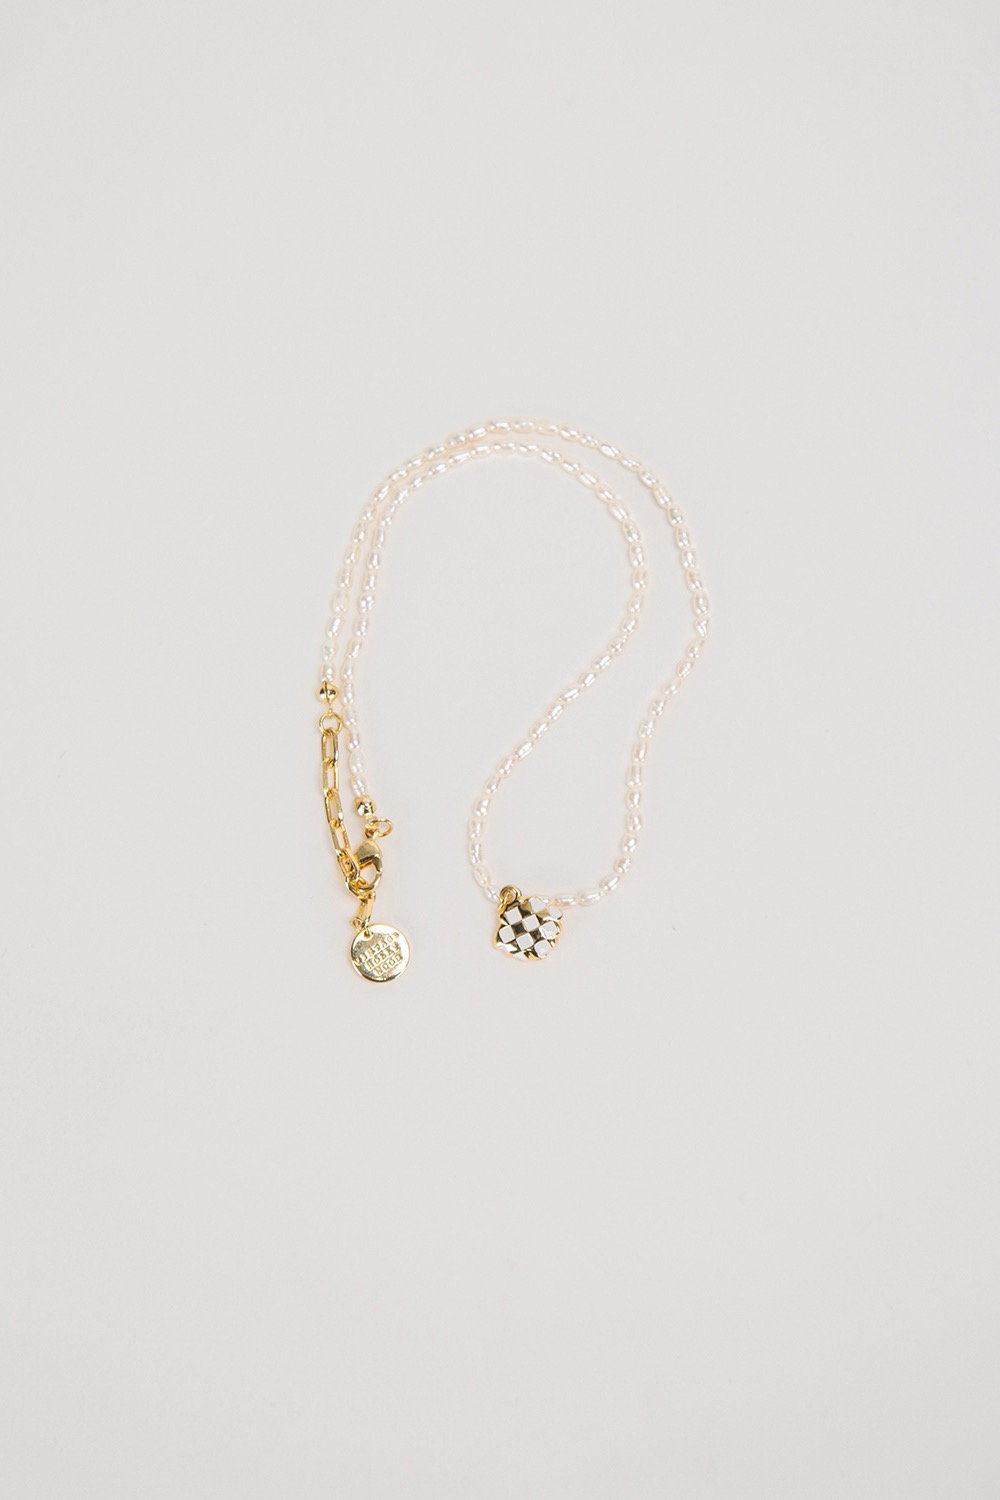 FRESH-WATER PEARL SEASHELL NECKLACE